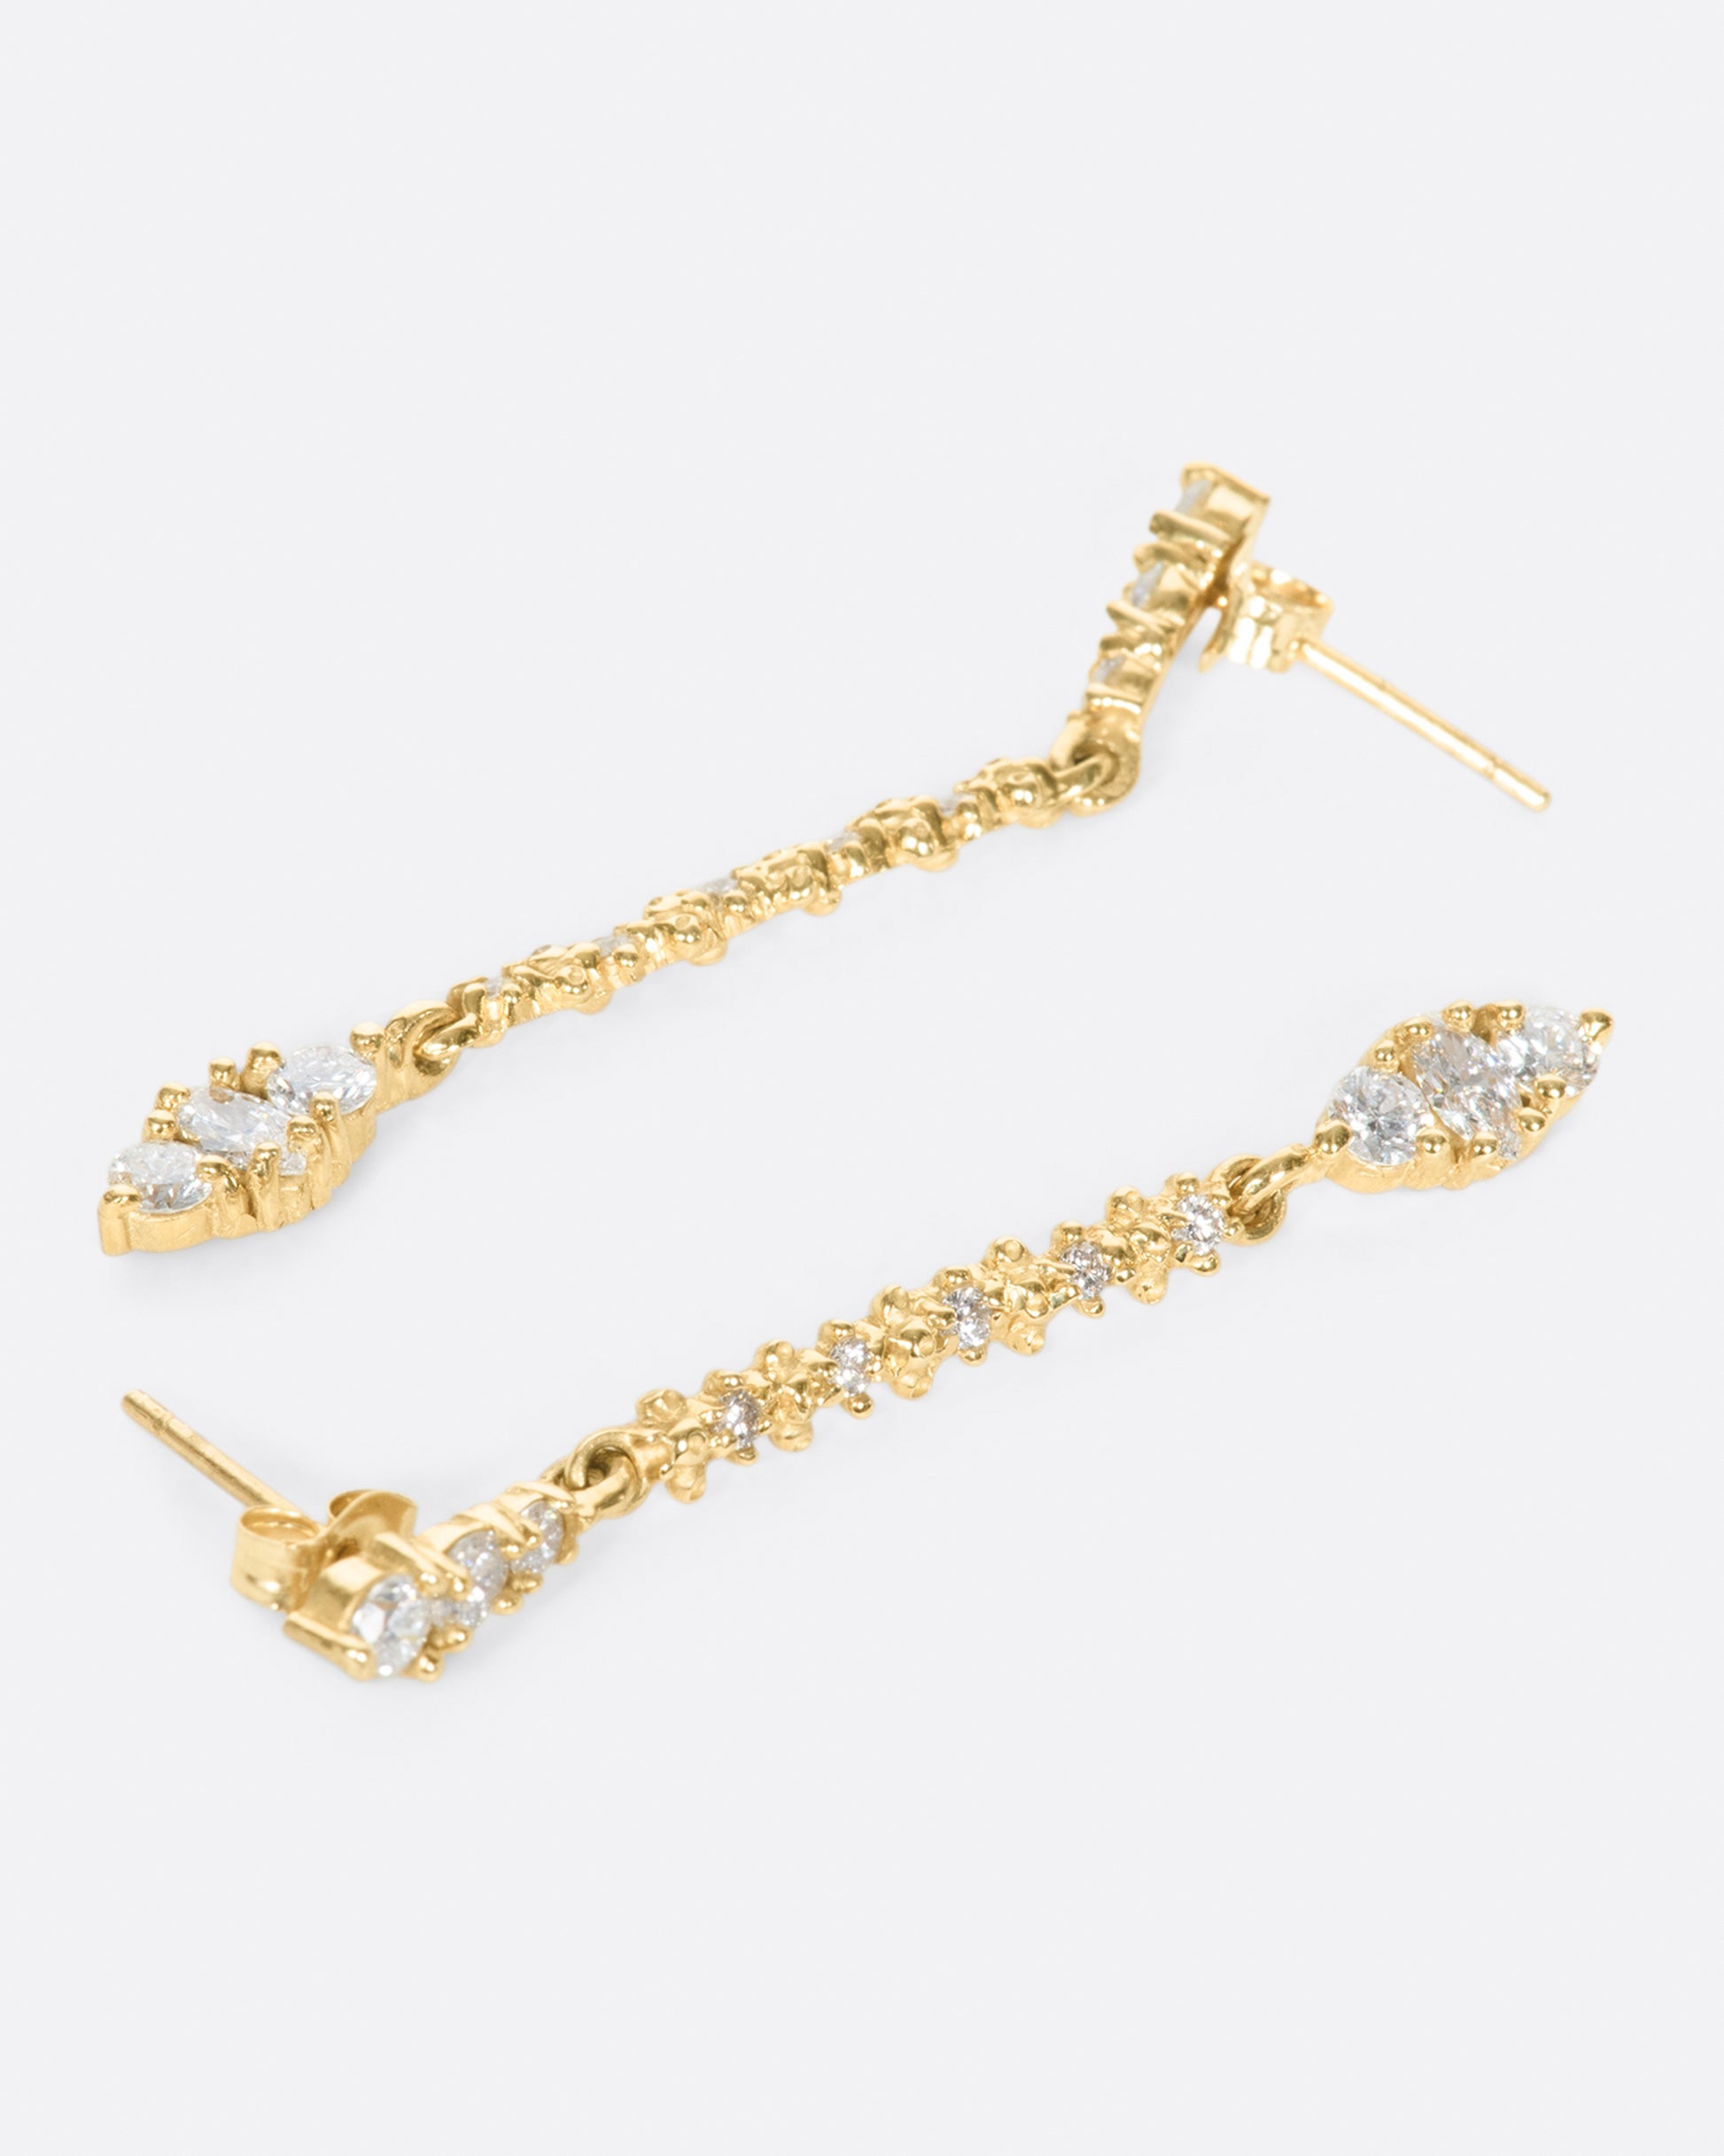 A pair of classic stud earrings with textured diamond drops.